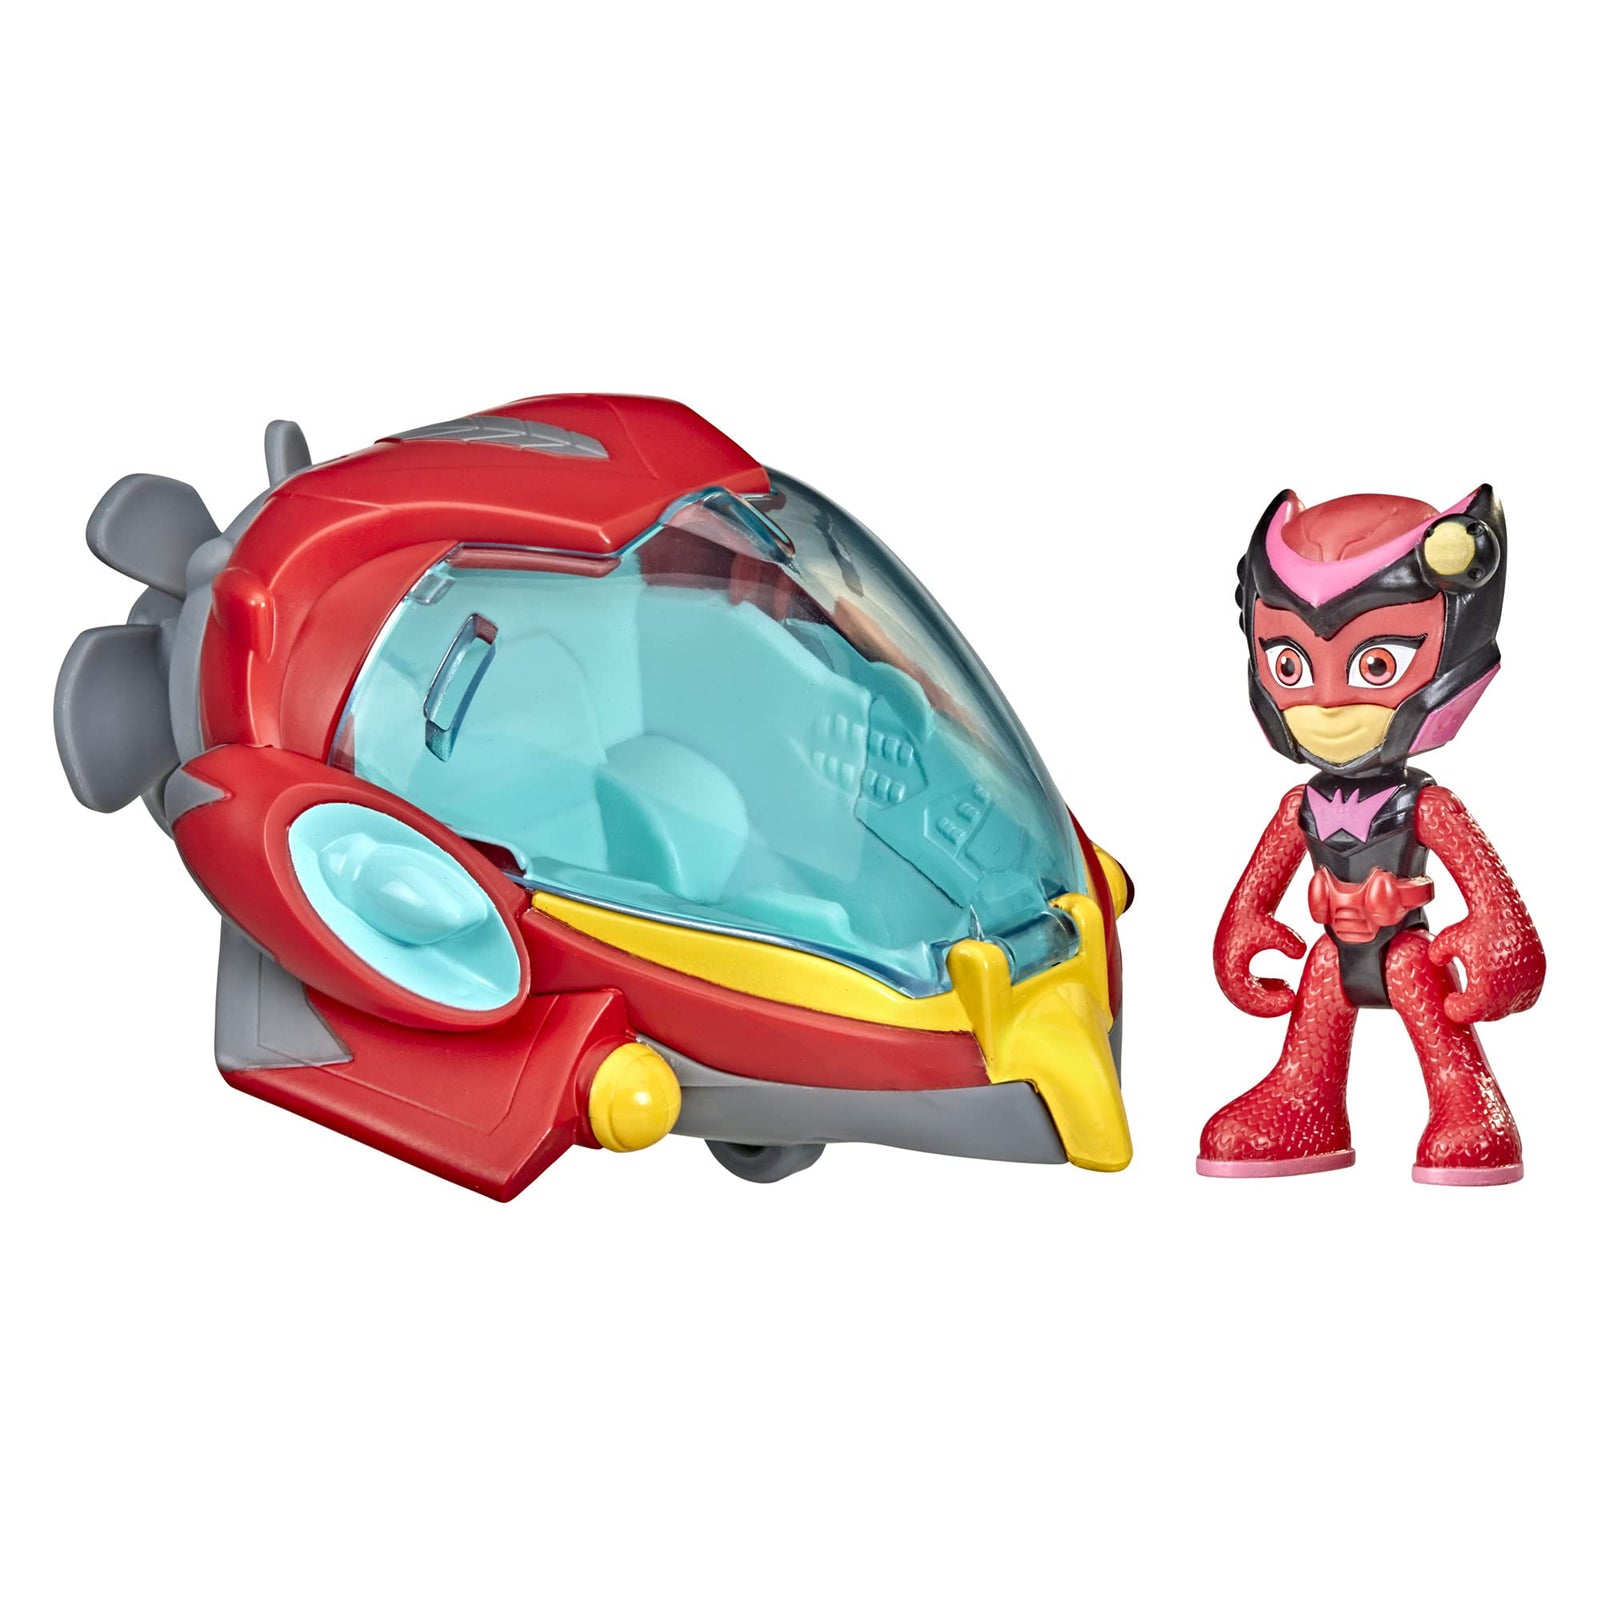 PJ Masks PJ Launching Submarine and Rovers Preschool Toy, Underwater-Themed Playset with 3 PJ Rovers and 3 Action Figures, Ages 3 and Up (Amazon Exclusive)